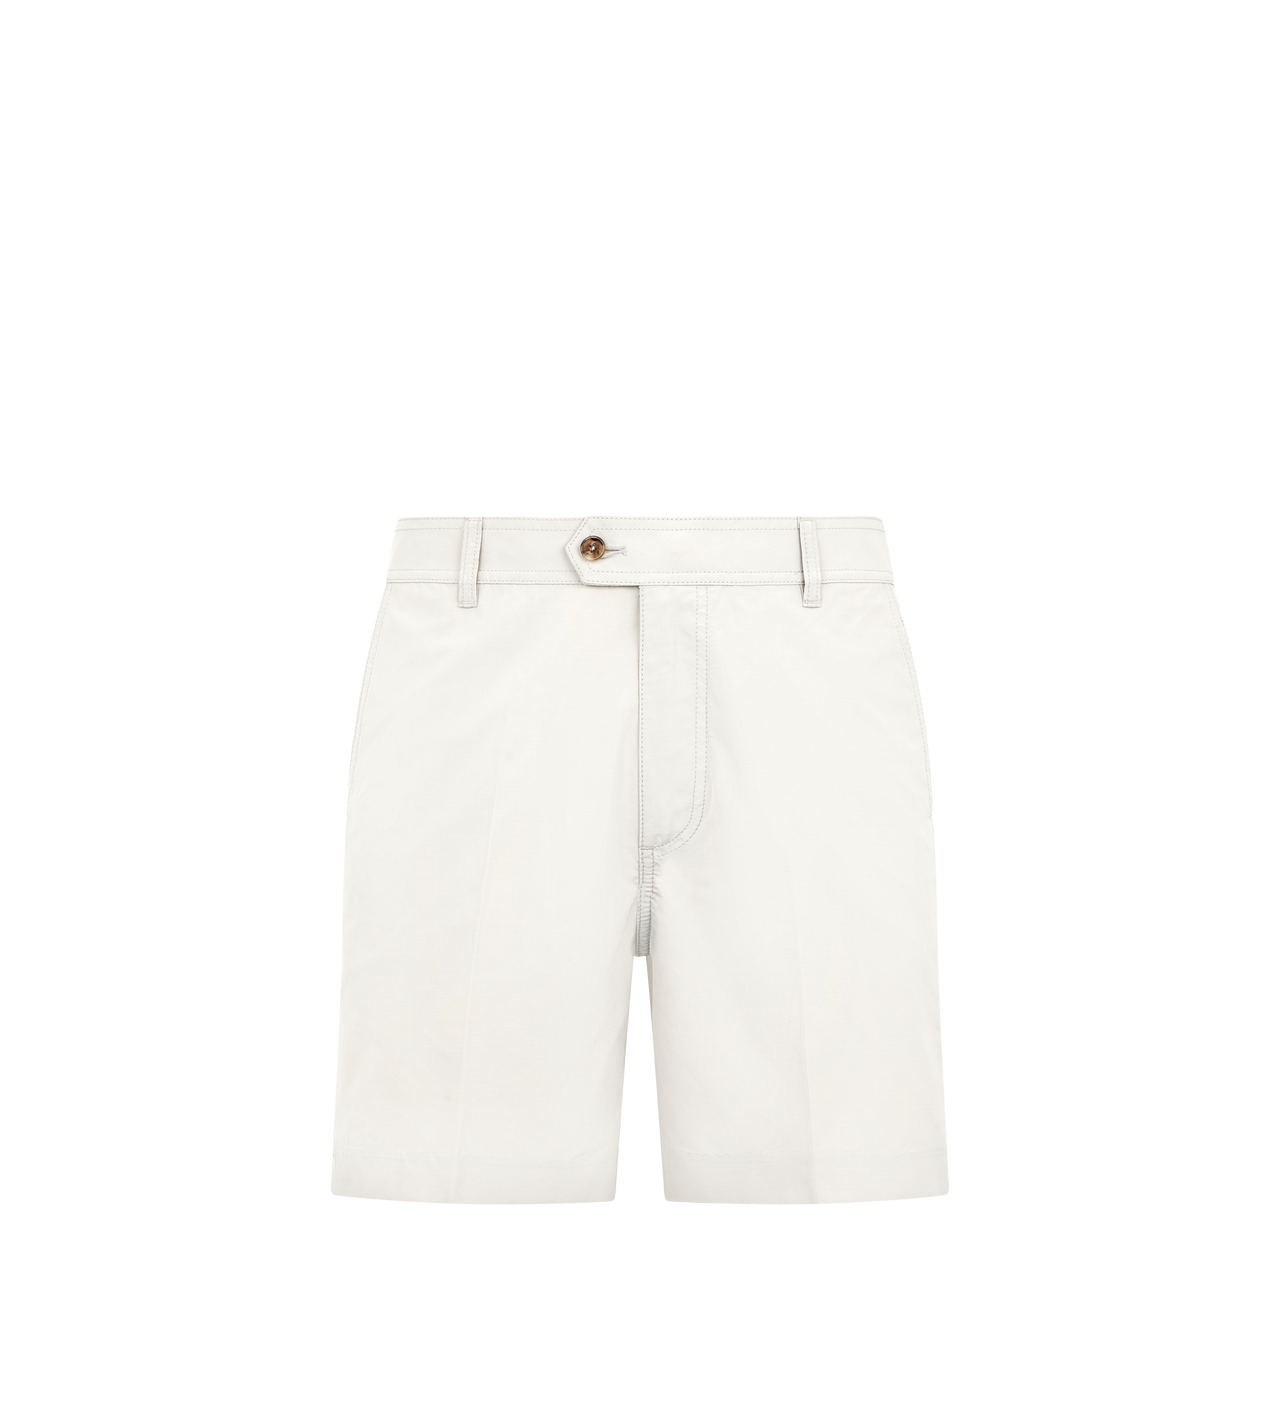 TECHNICAL FAILLE TAILORED SHORTS